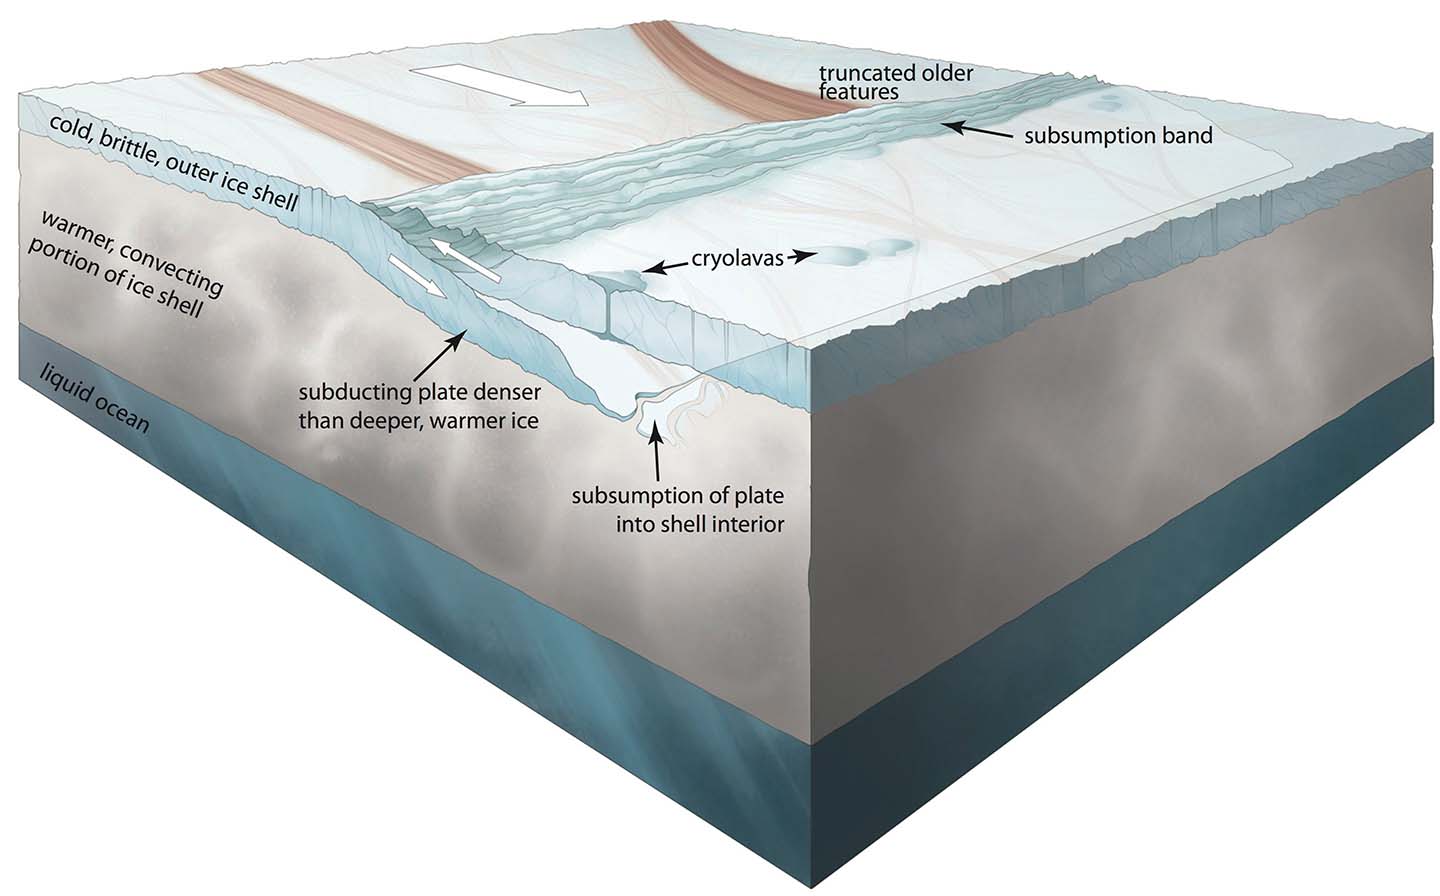 conceptual illustration of the subduction process